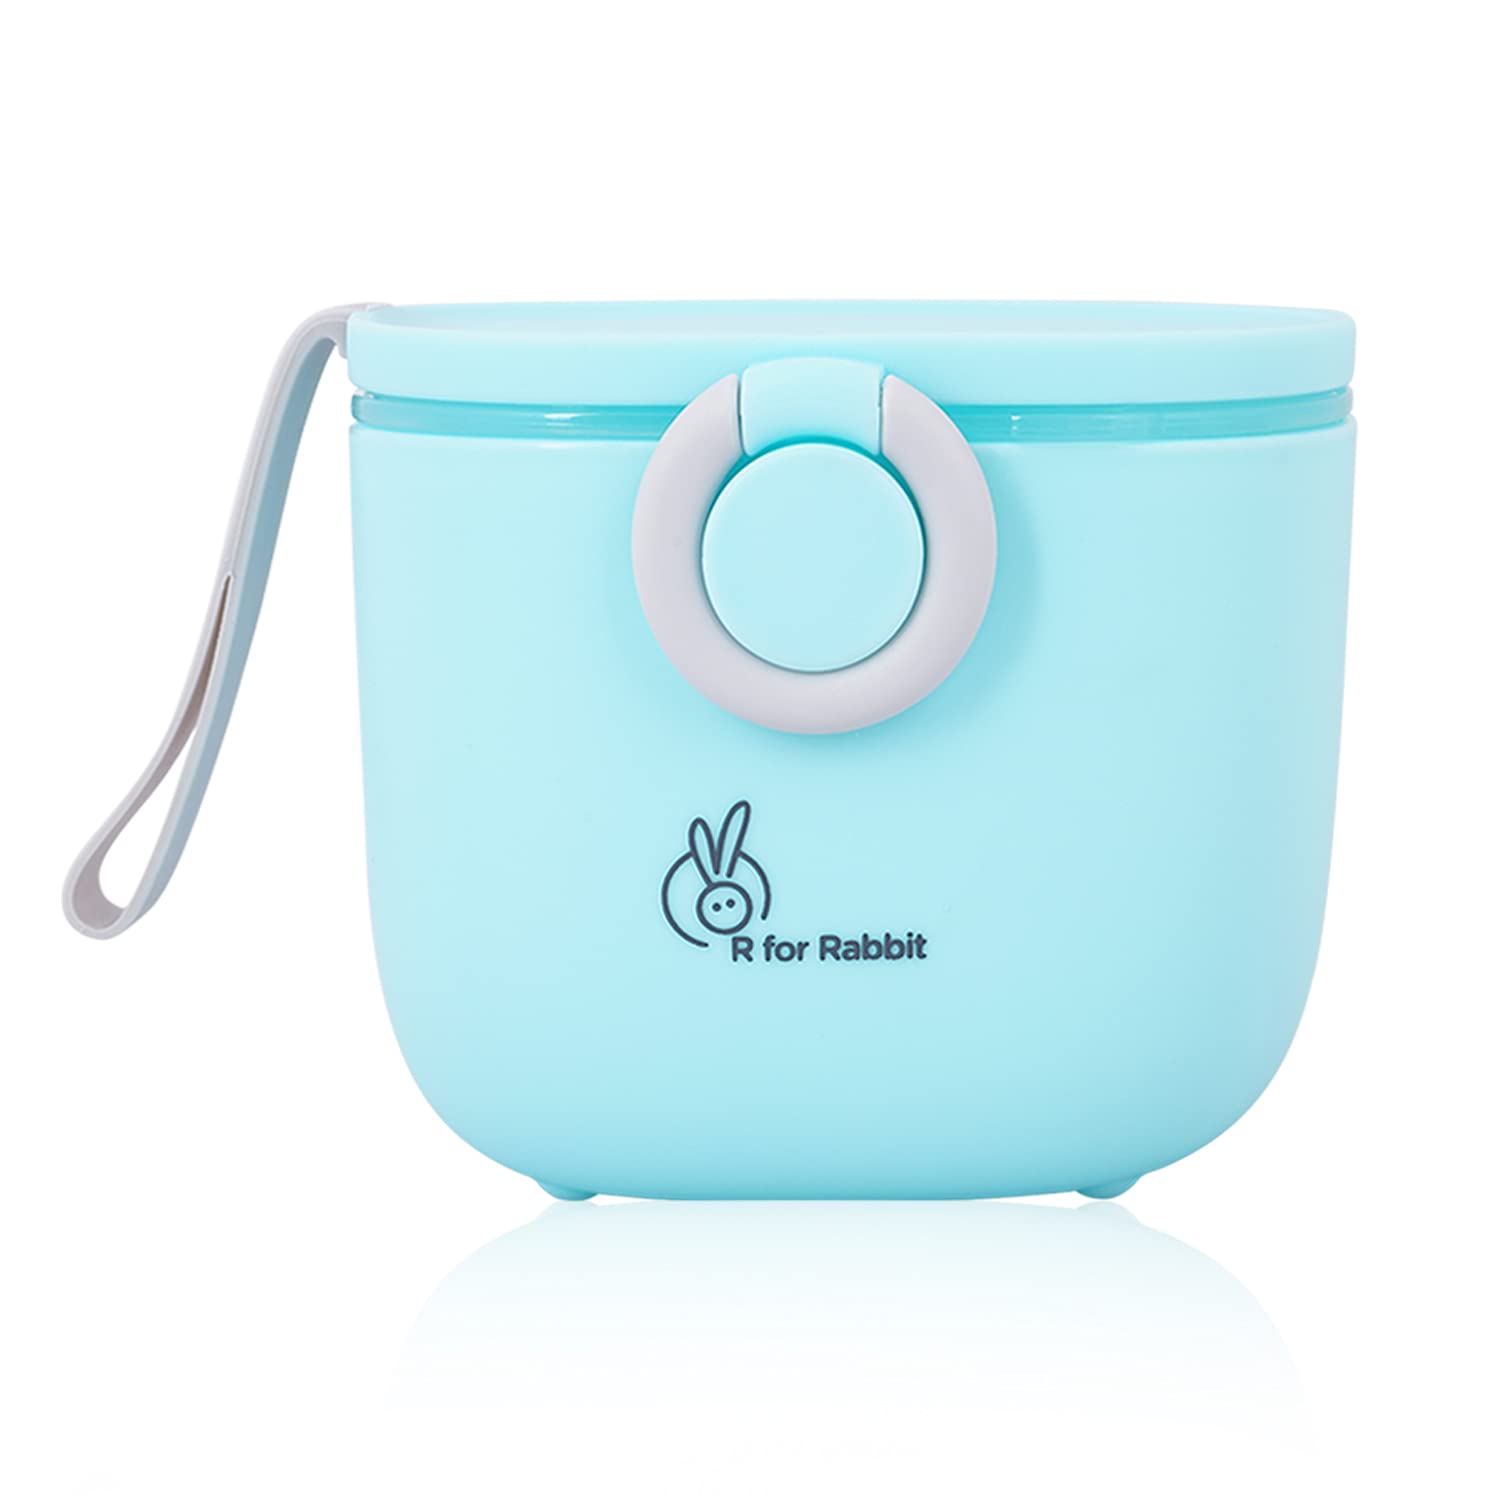 R FOR RABBIT First Feed Box (Feeding Bowl) For Babies - Blue, 0m+